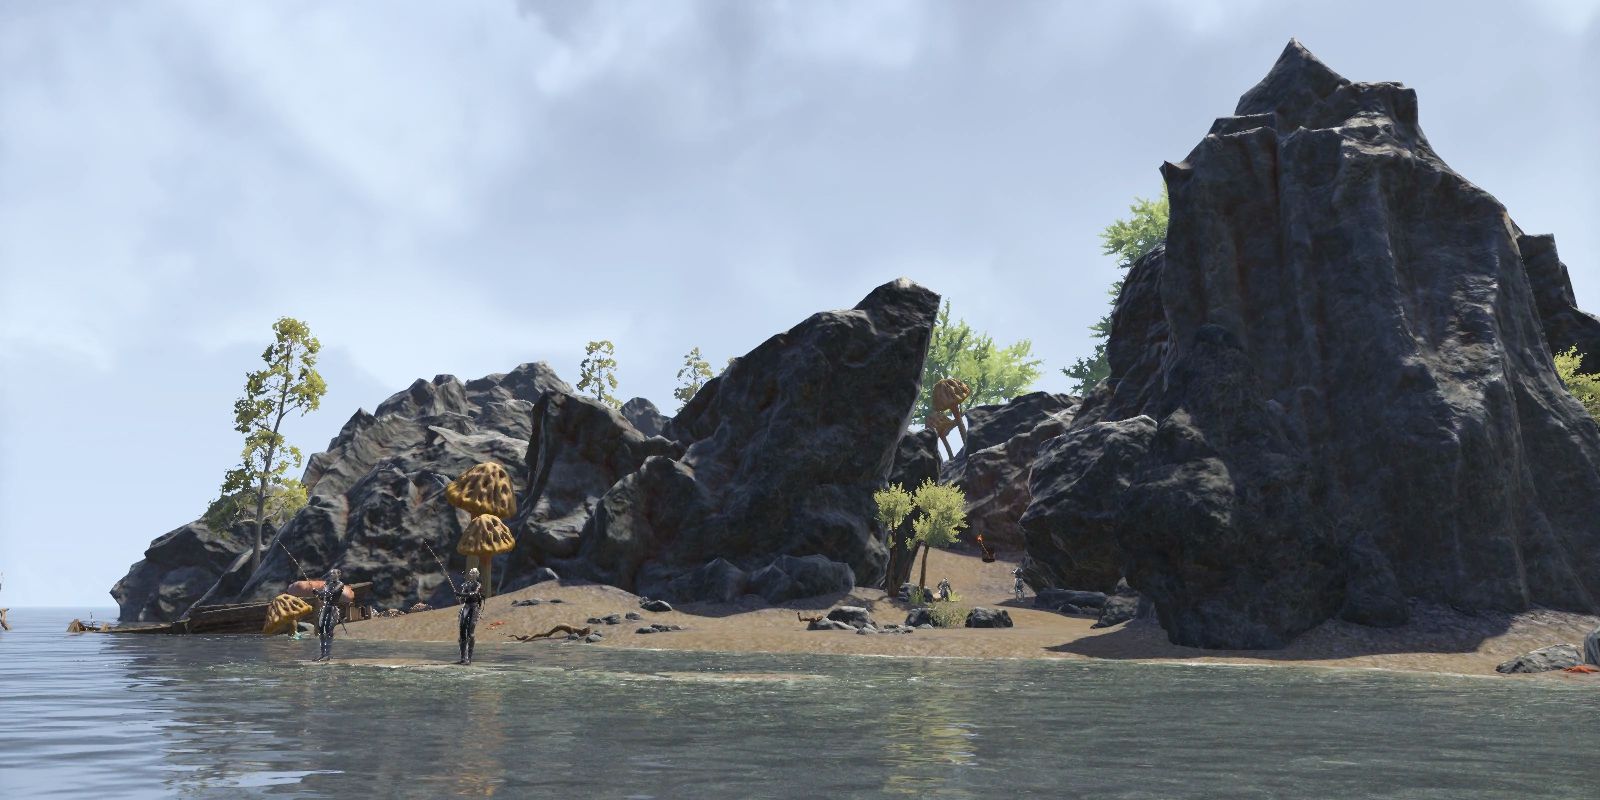 Where The New Elder Scrolls Online Expansion Could Be Set Eltheric Islands Ocean Location